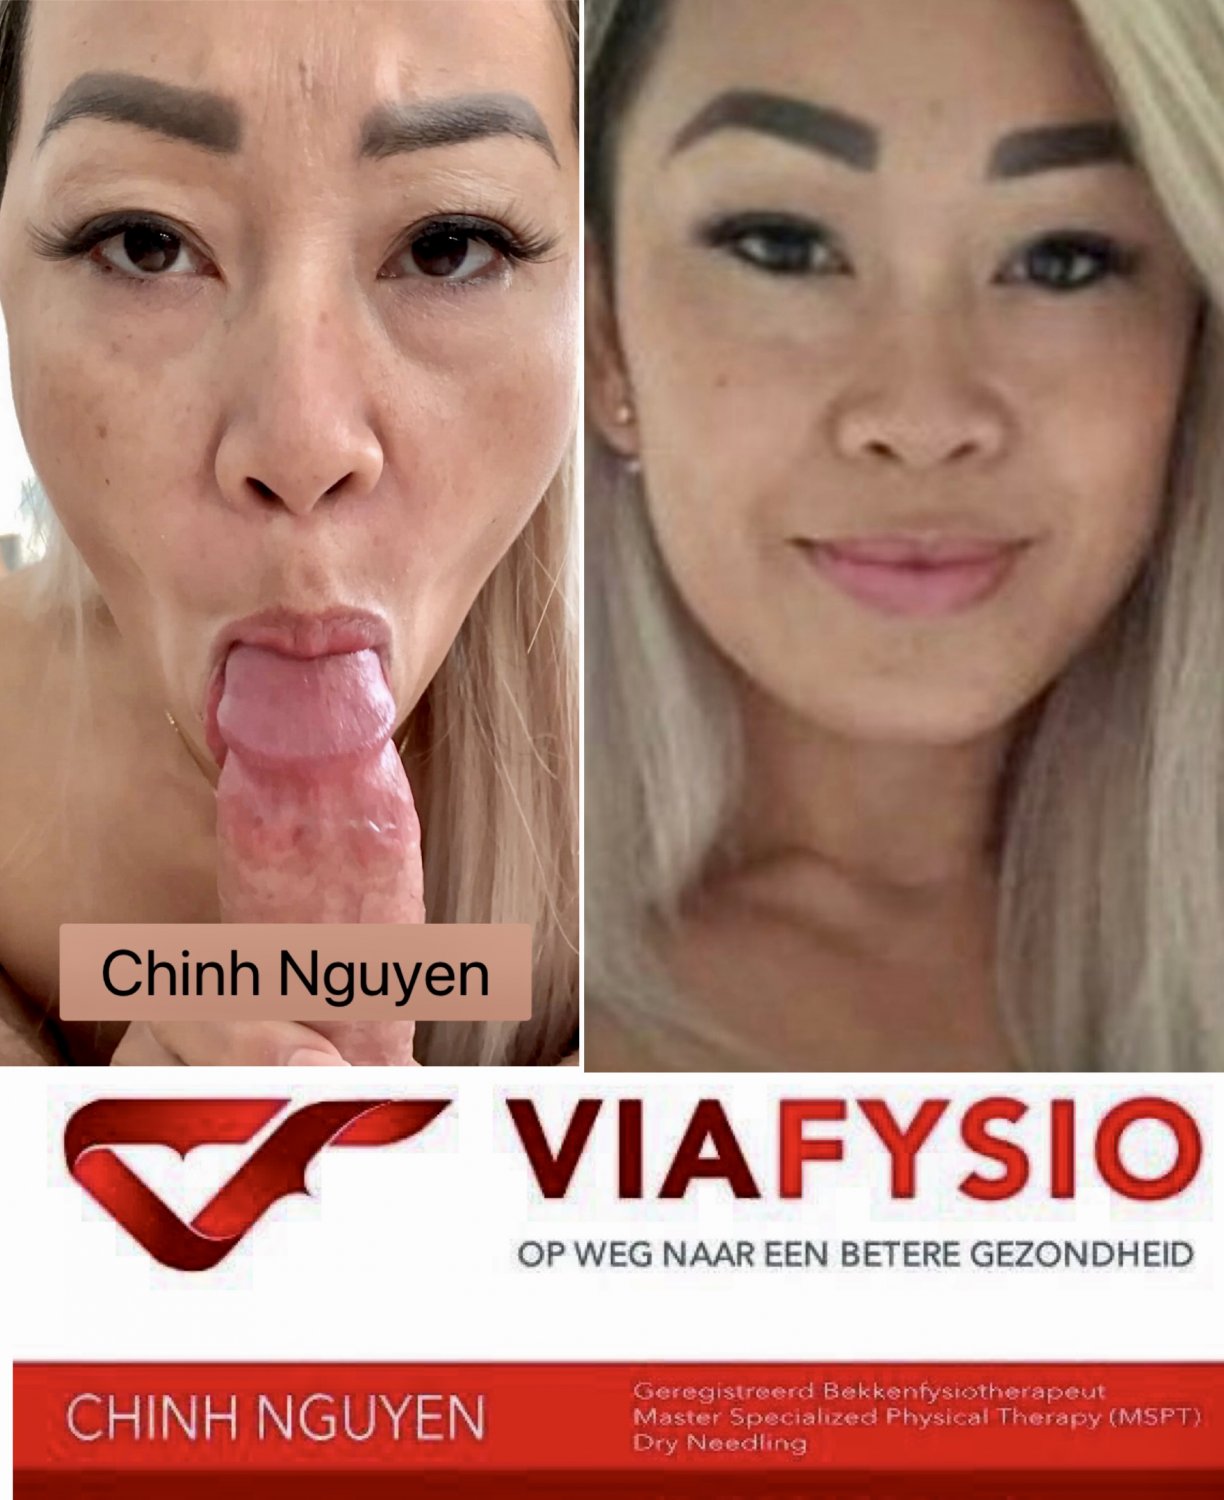 Viafysio Chinh Nguyen Viet Webslut - Download Enabled #FVWMaelY